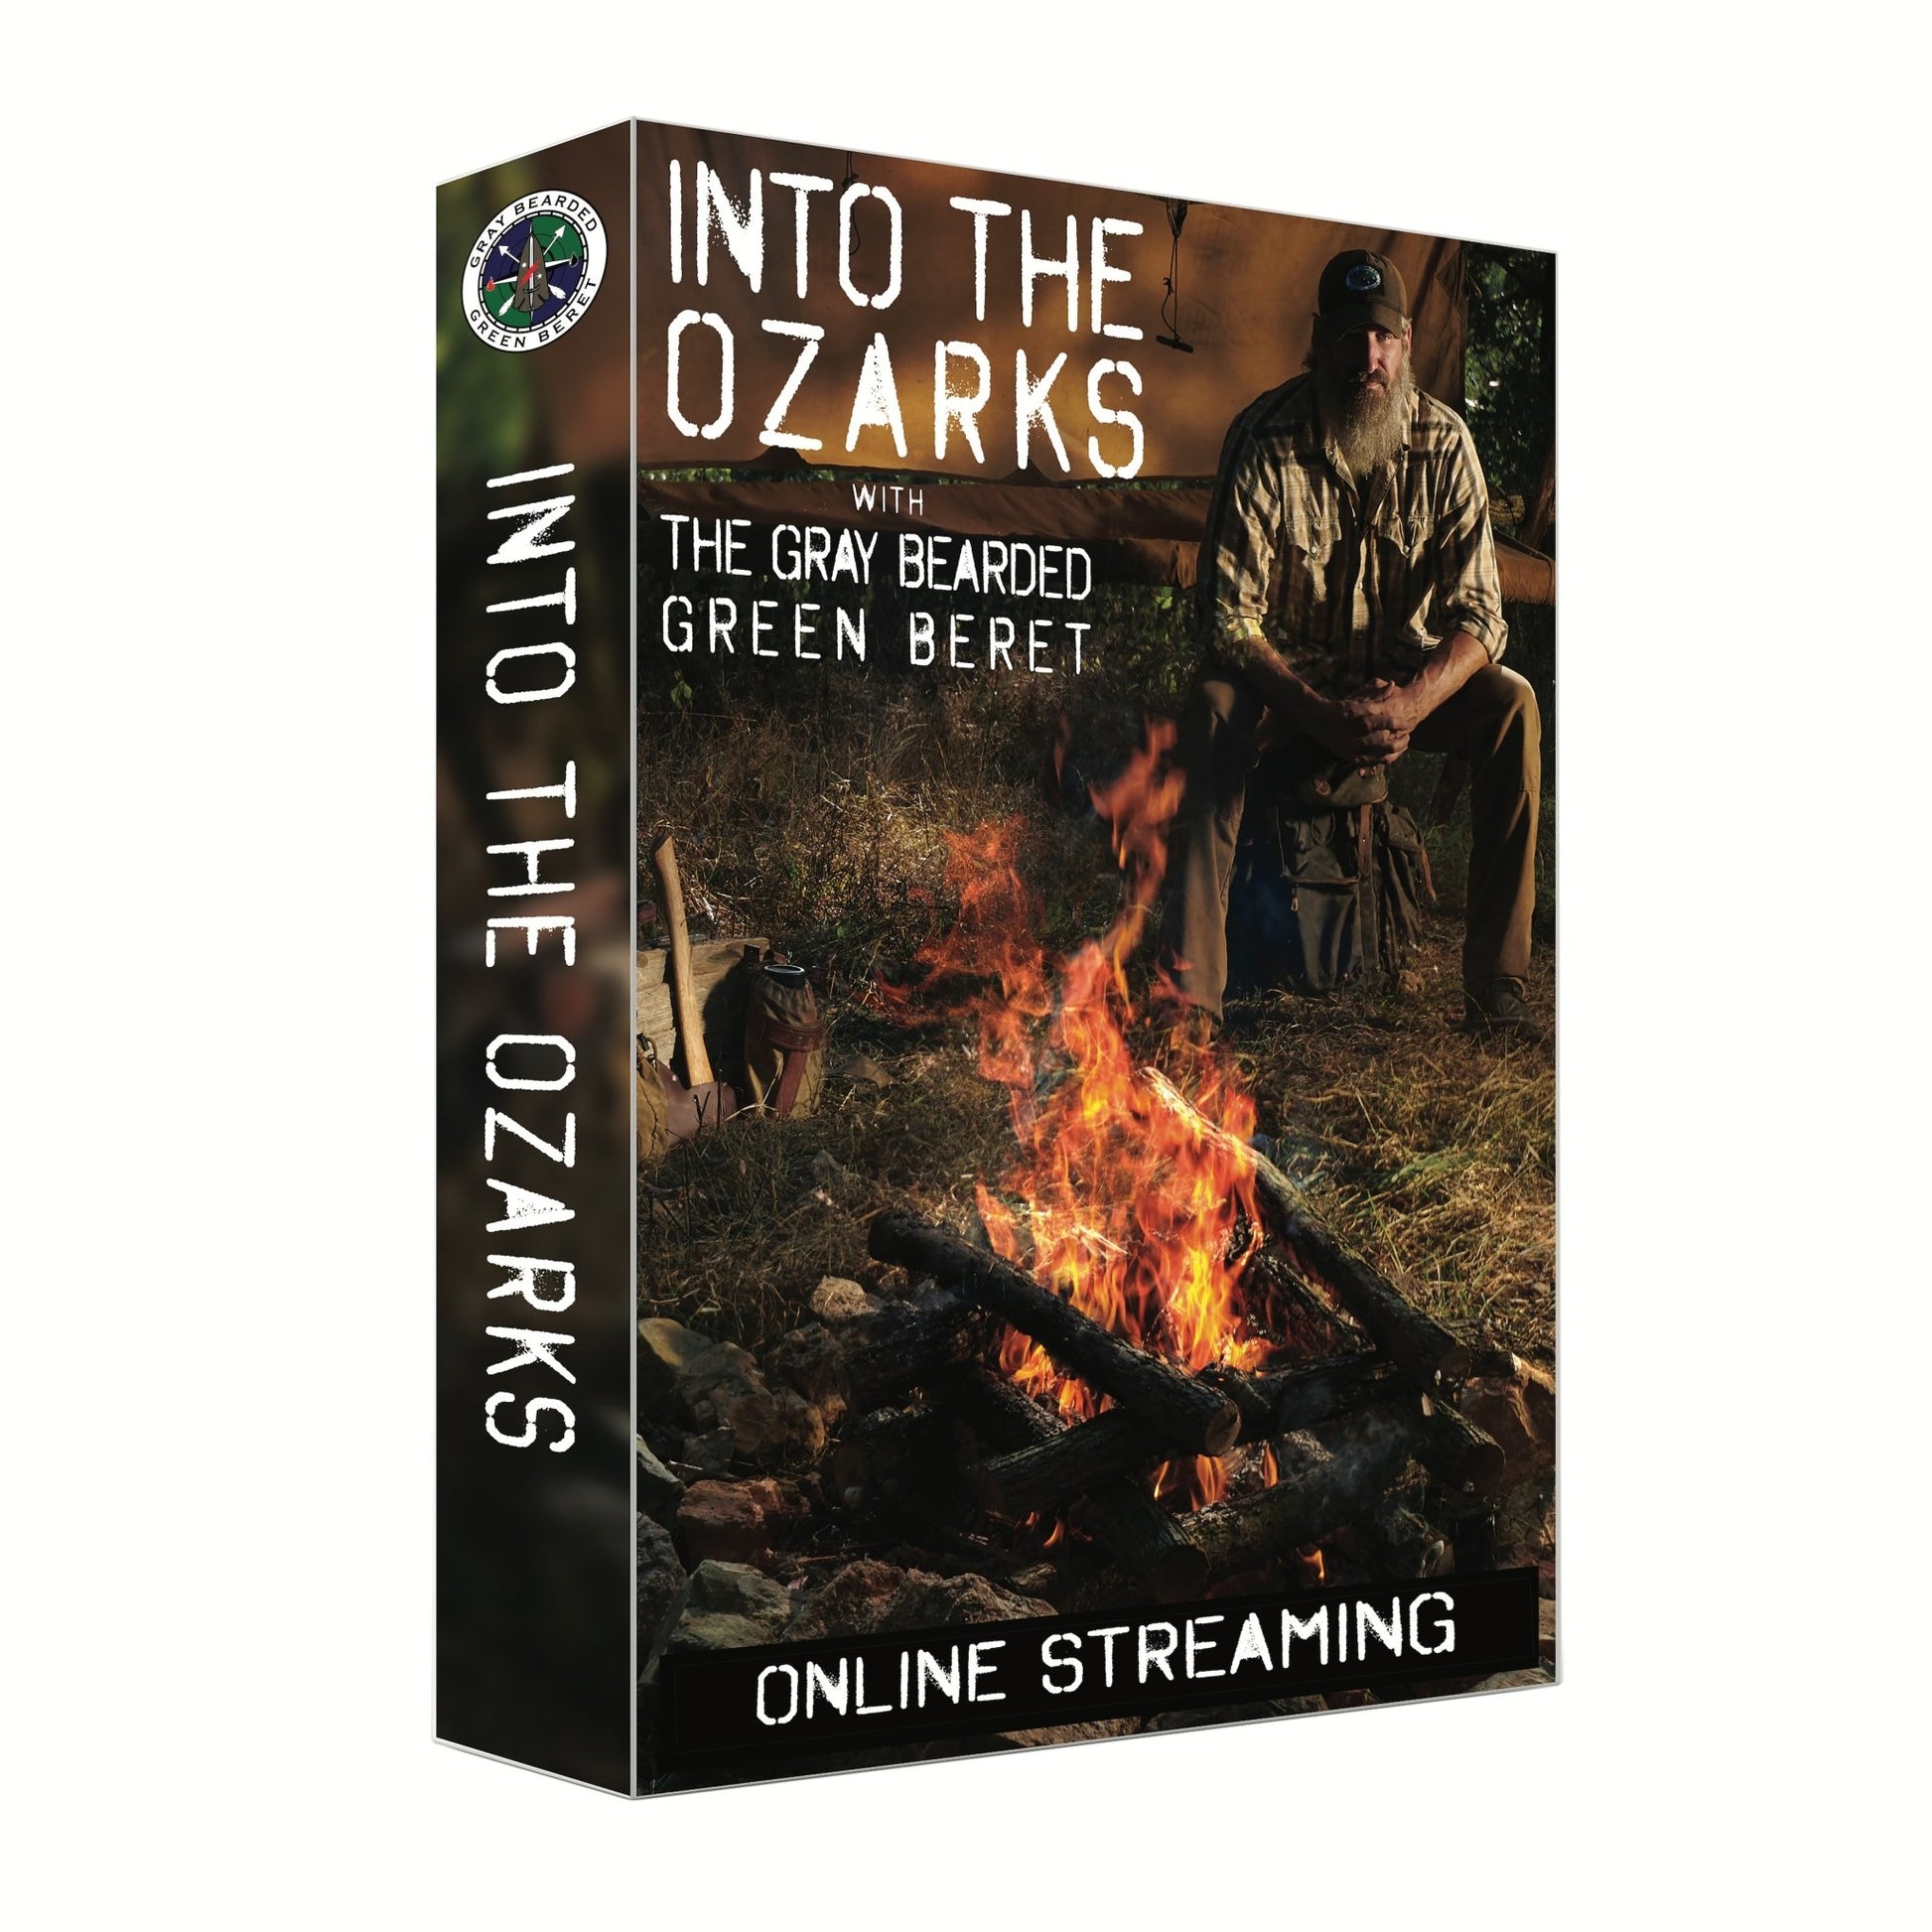 Into the Ozarks USB + Free Streaming Limited Offer - Gray Bearded Green Beret